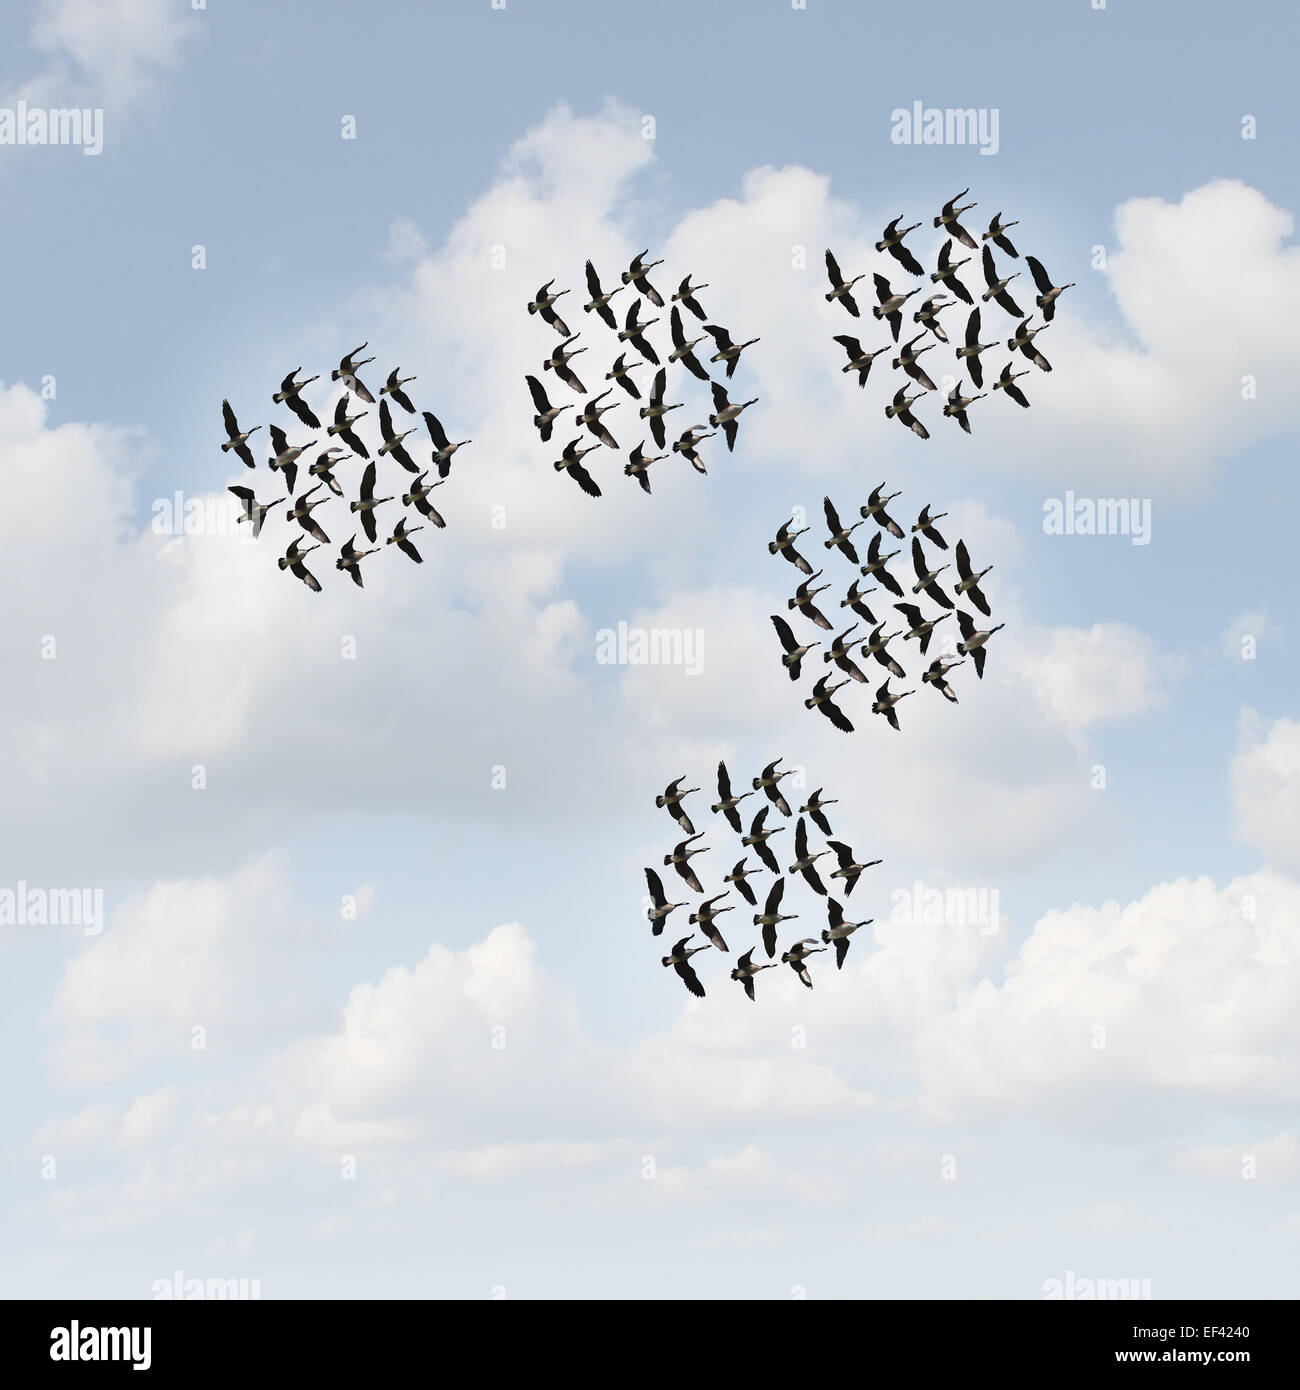 Mobile network and communication concept as groups of organized teams of flying geese flock moving together as a business metaphor for teamwork management. Stock Photo